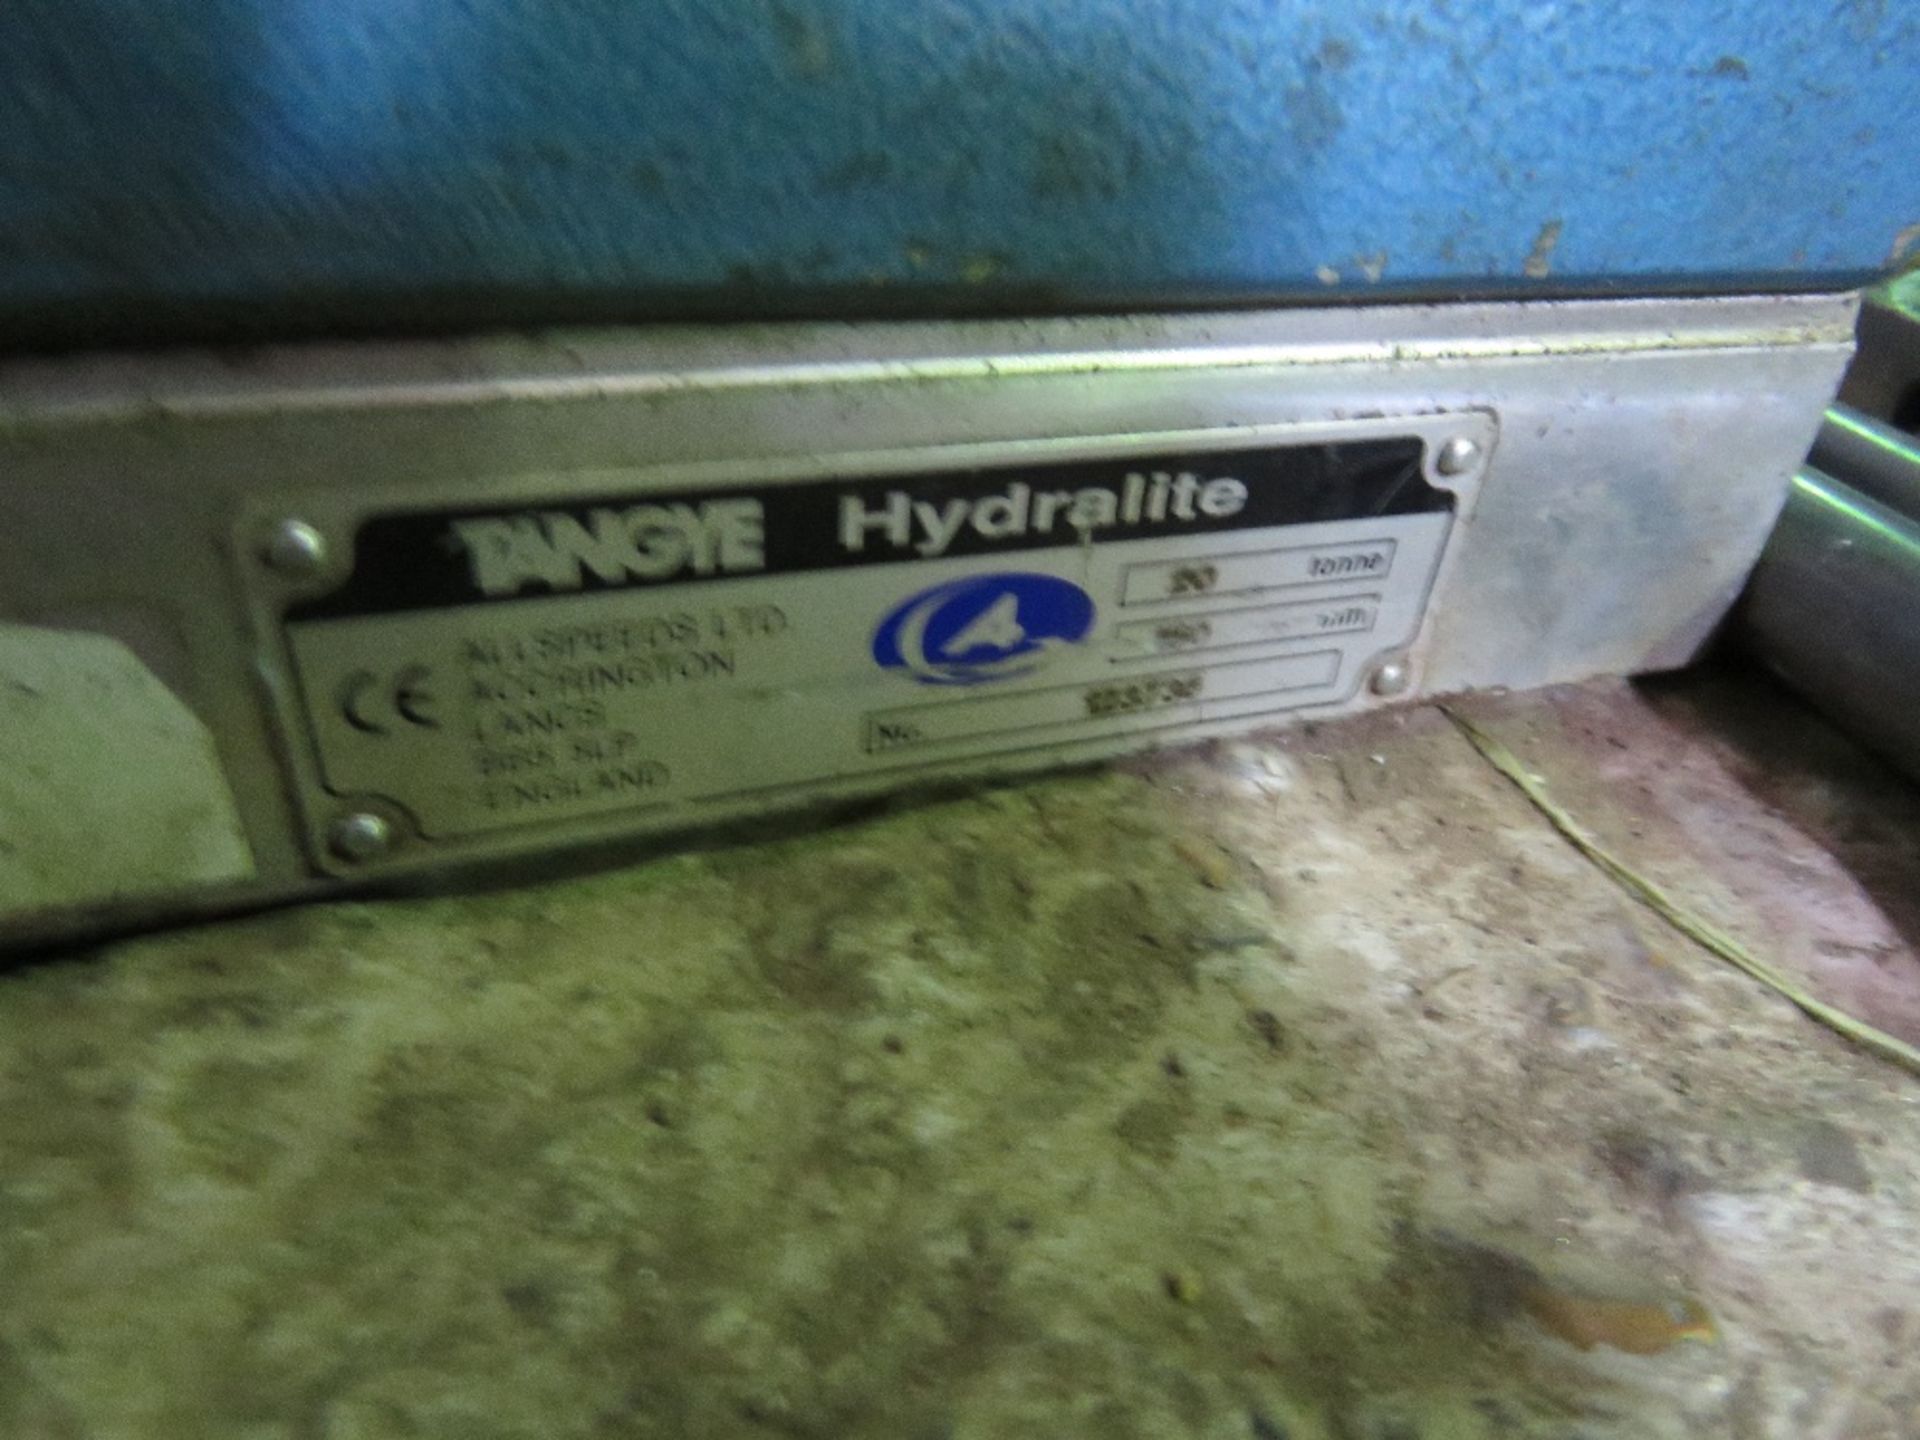 2 X HYDRALITE TANGYE 20TONNE HYDRAULIC JACKS, 150MM RATED LIFT WITH LEVER BARS. THIS LOT IS SOLD - Image 2 of 3